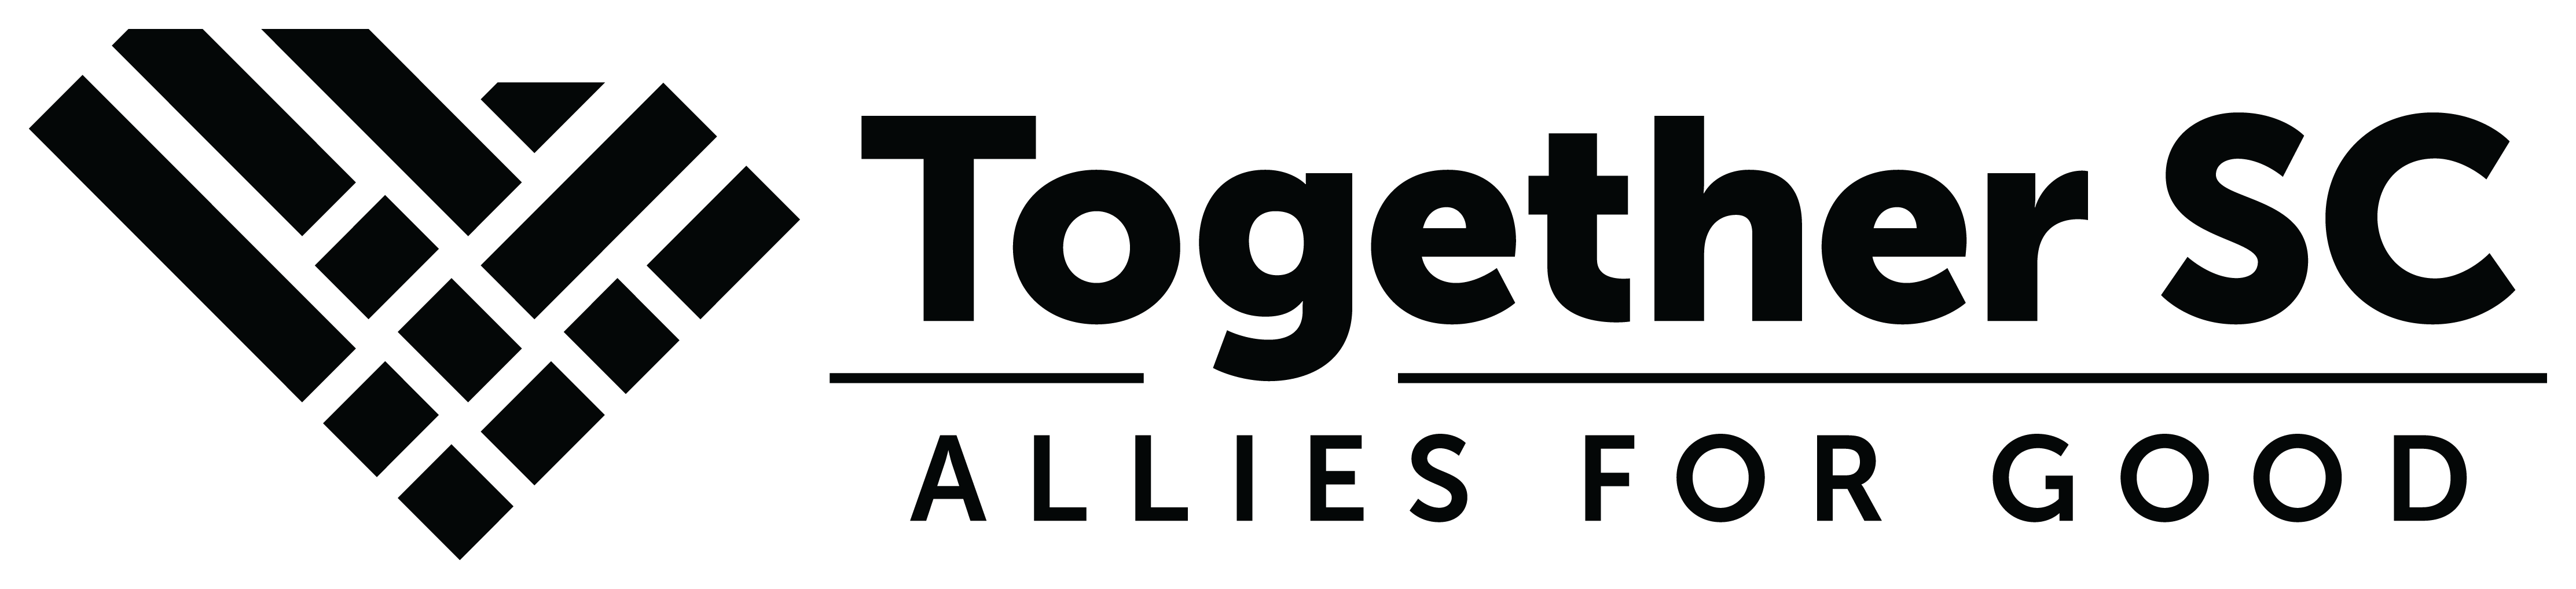 Together SC Allies for Good logo with black text and black graphic illustration of state of South Carolina